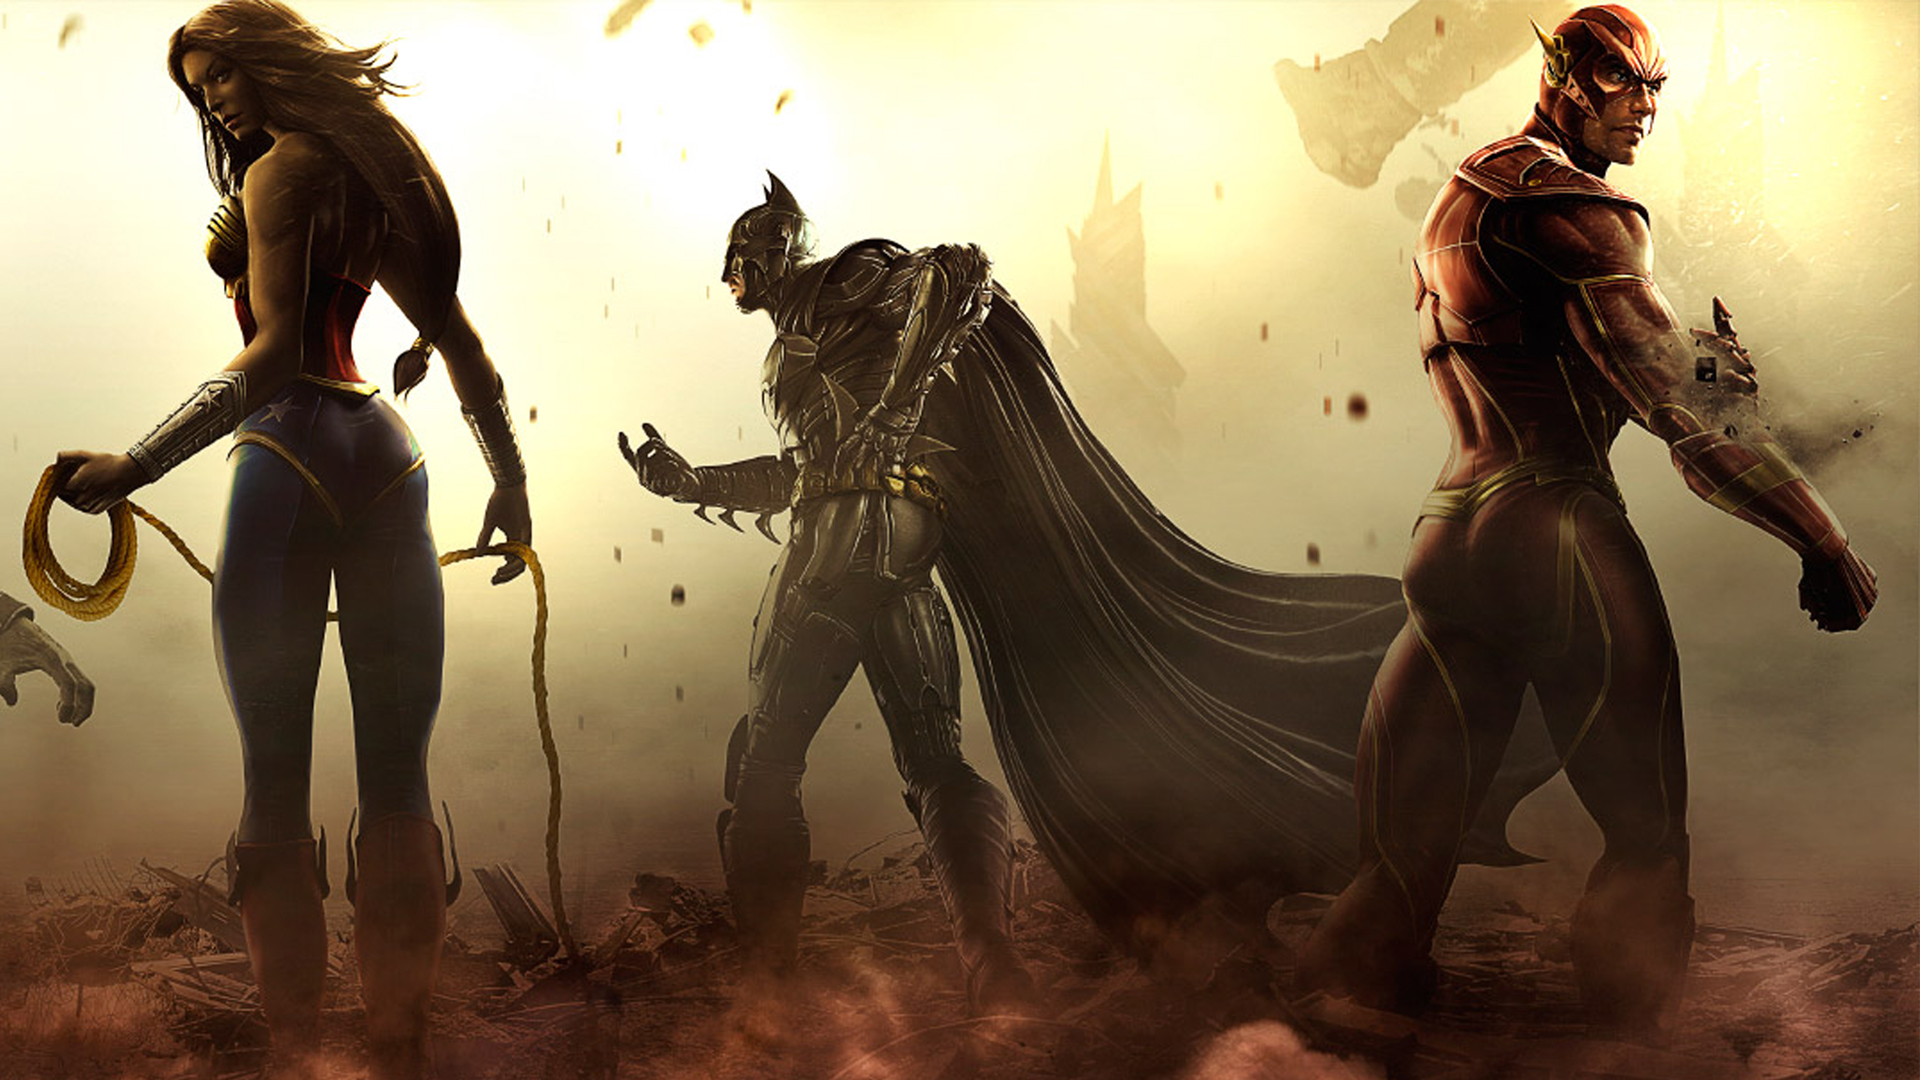  Gods Among Us You are downloading Injustice Gods Among Us wallpaper 9 1920x1080